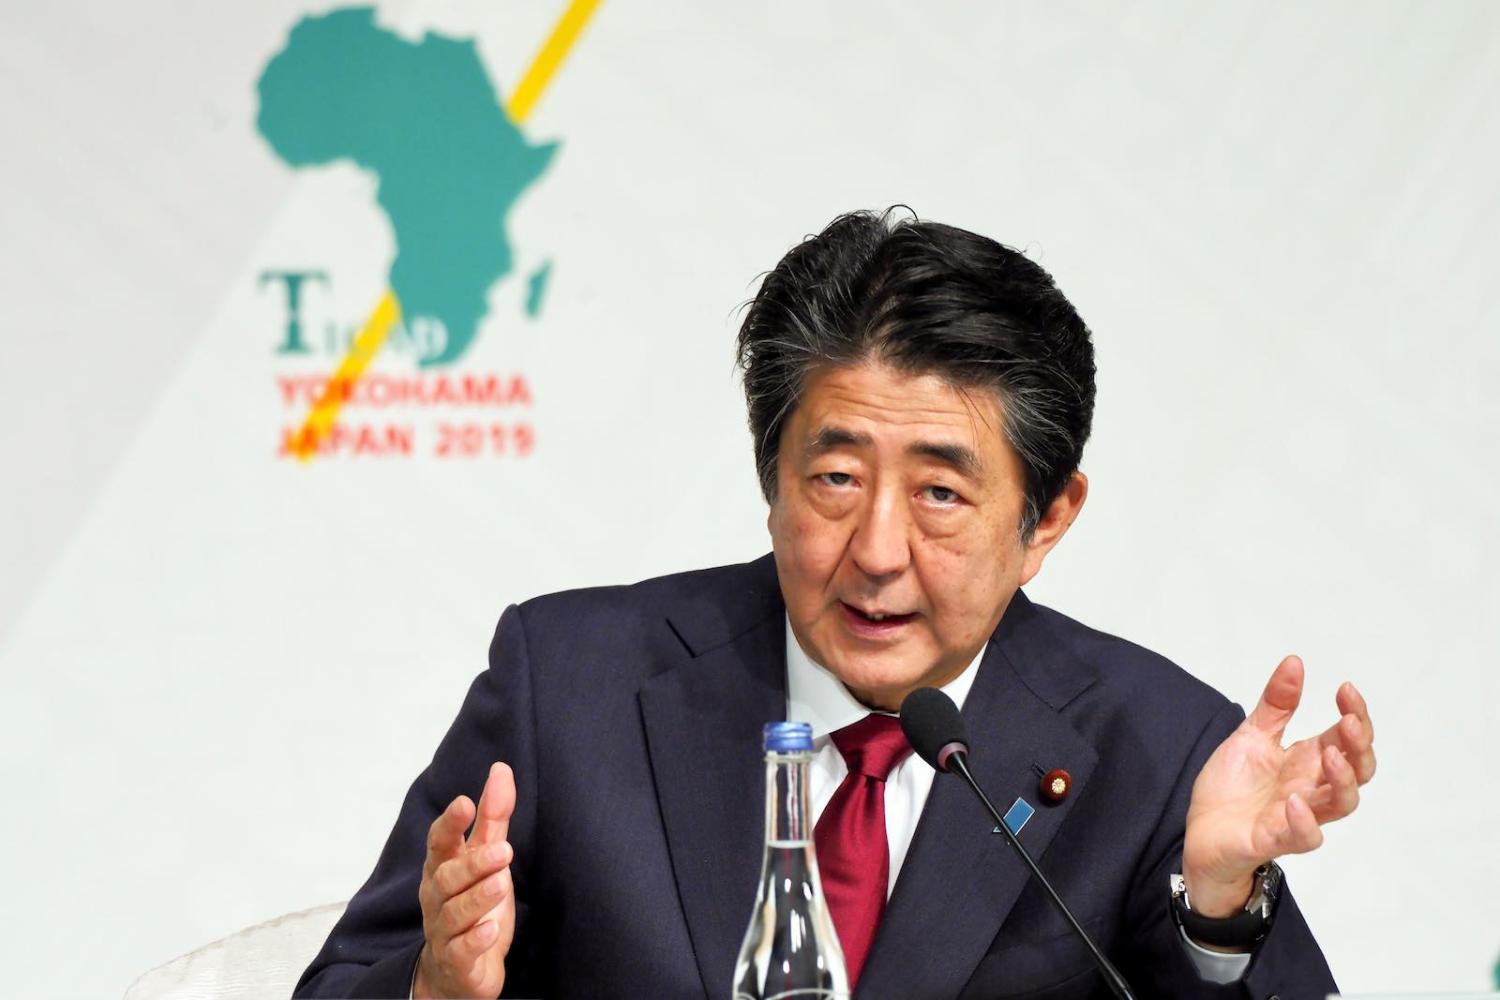 Japan’s Prime Minister Shinzo Abe answers questions during a press conference last month at the seventh Tokyo International Conference on African Development (Photo: Toshifumi Kitamura/AFP/Getty Images)